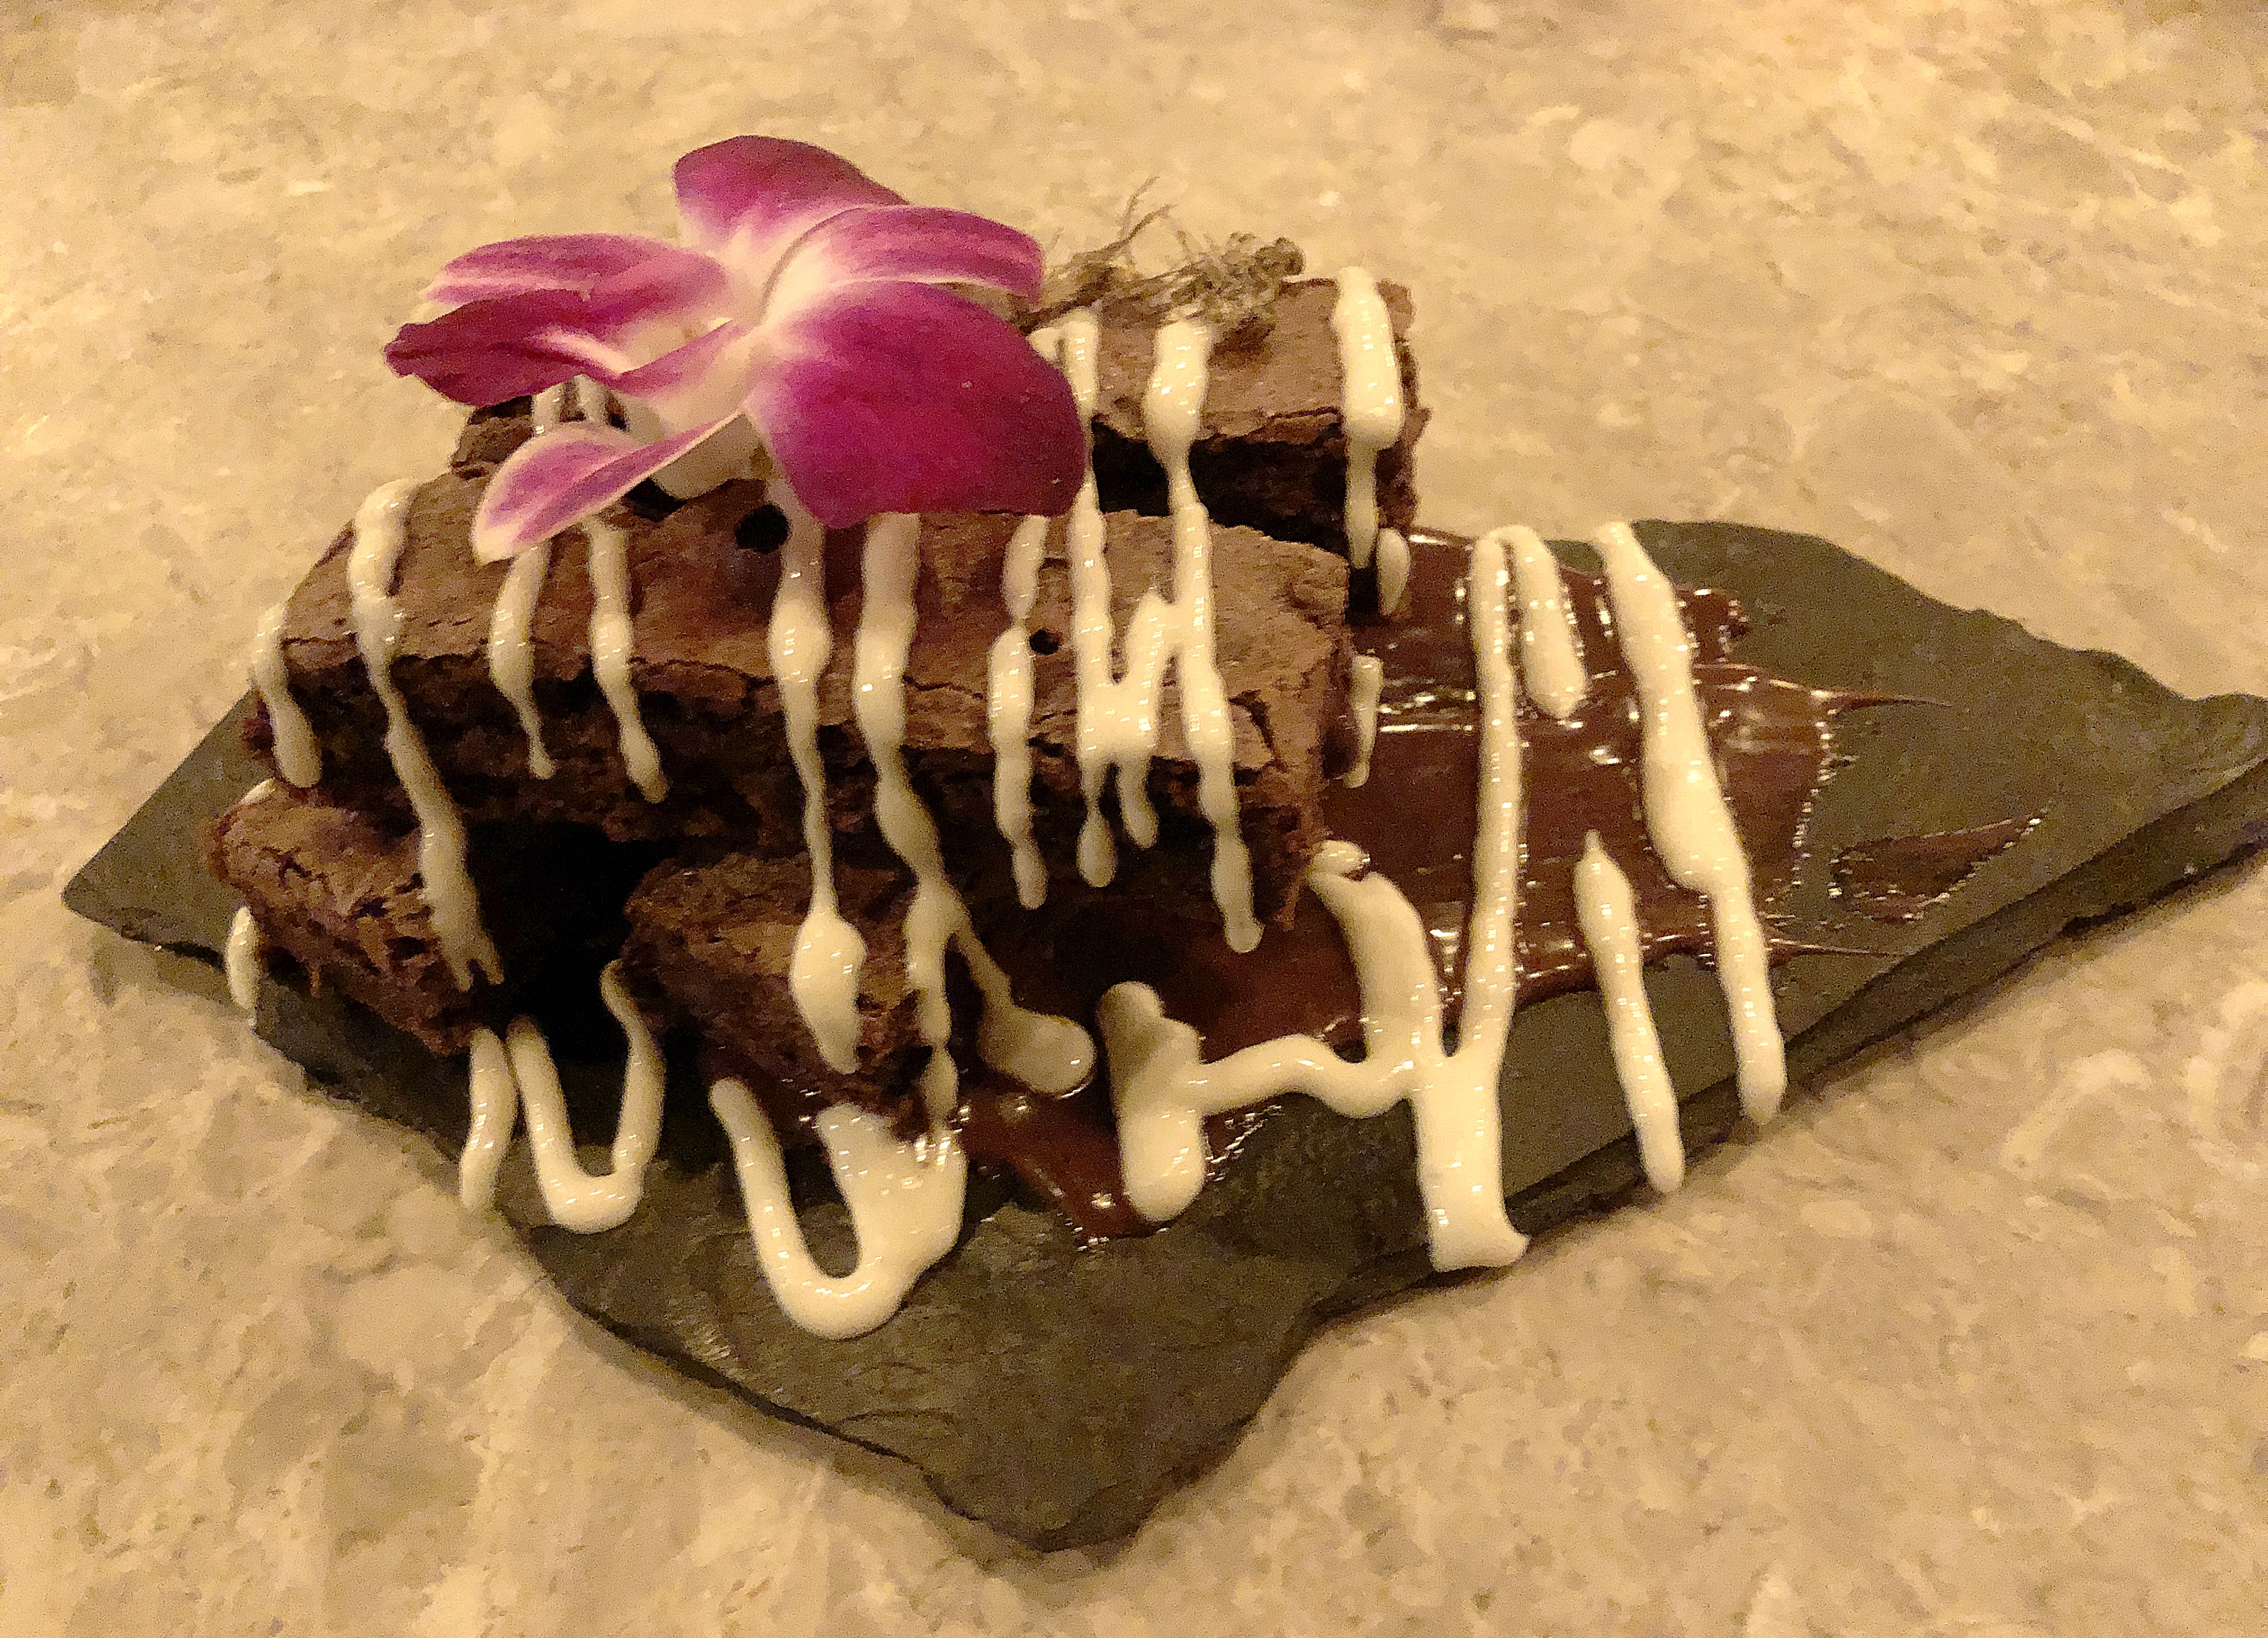 The cricket brownies at Ostra don’t taste like crickets. They taste like brownies.